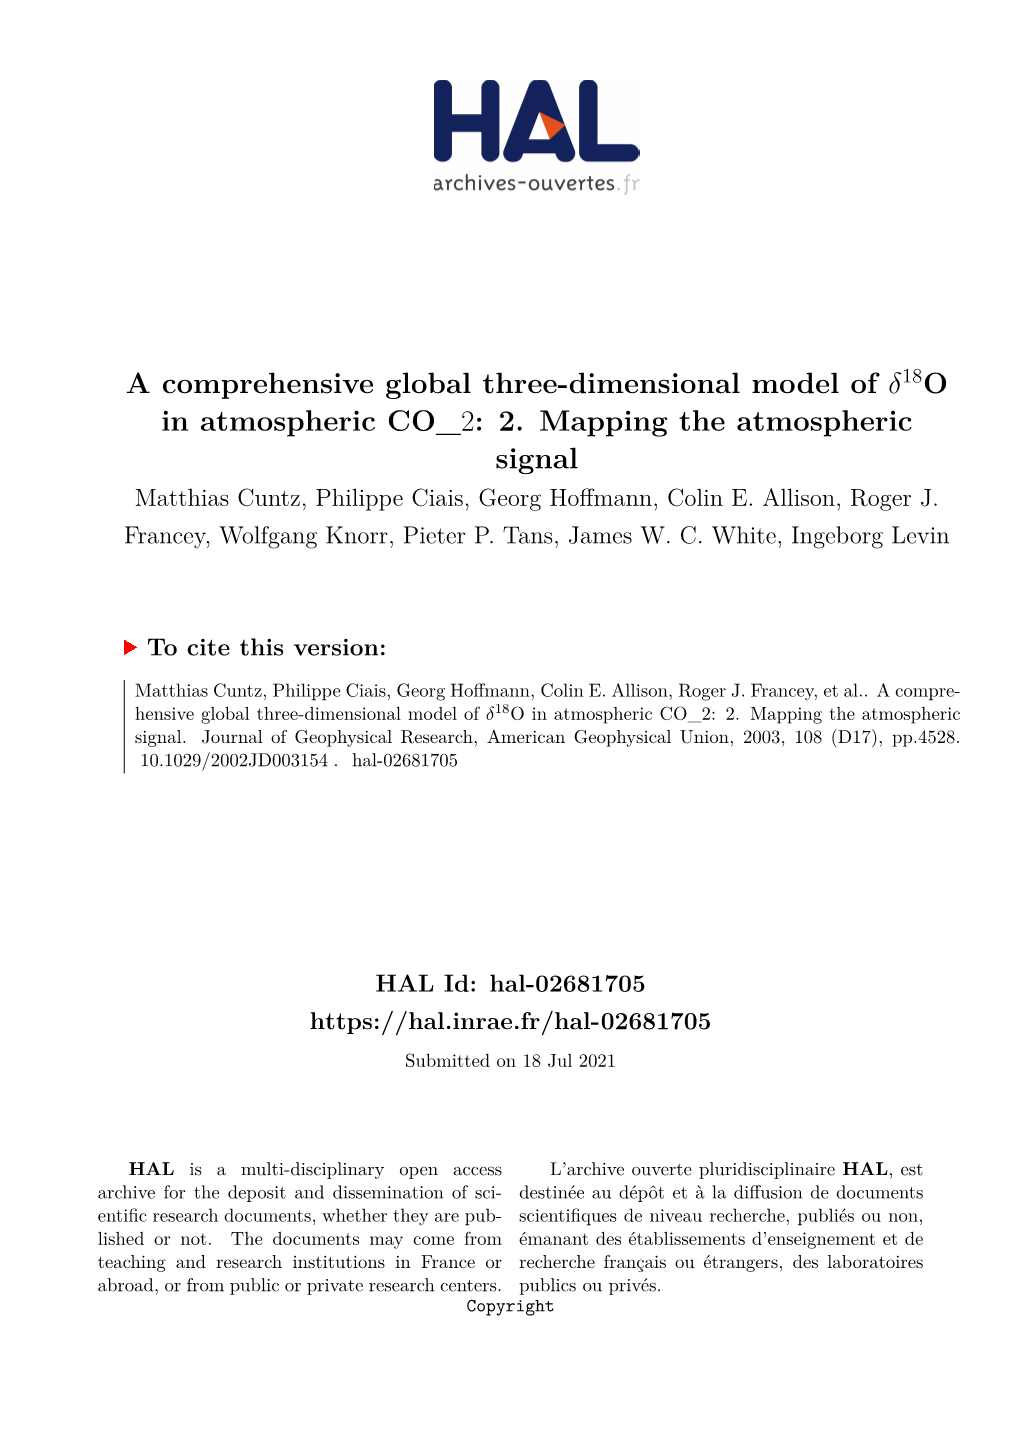 A Comprehensive Global Three-Dimensional Model of Δ18o in Atmospheric CO 2: 2